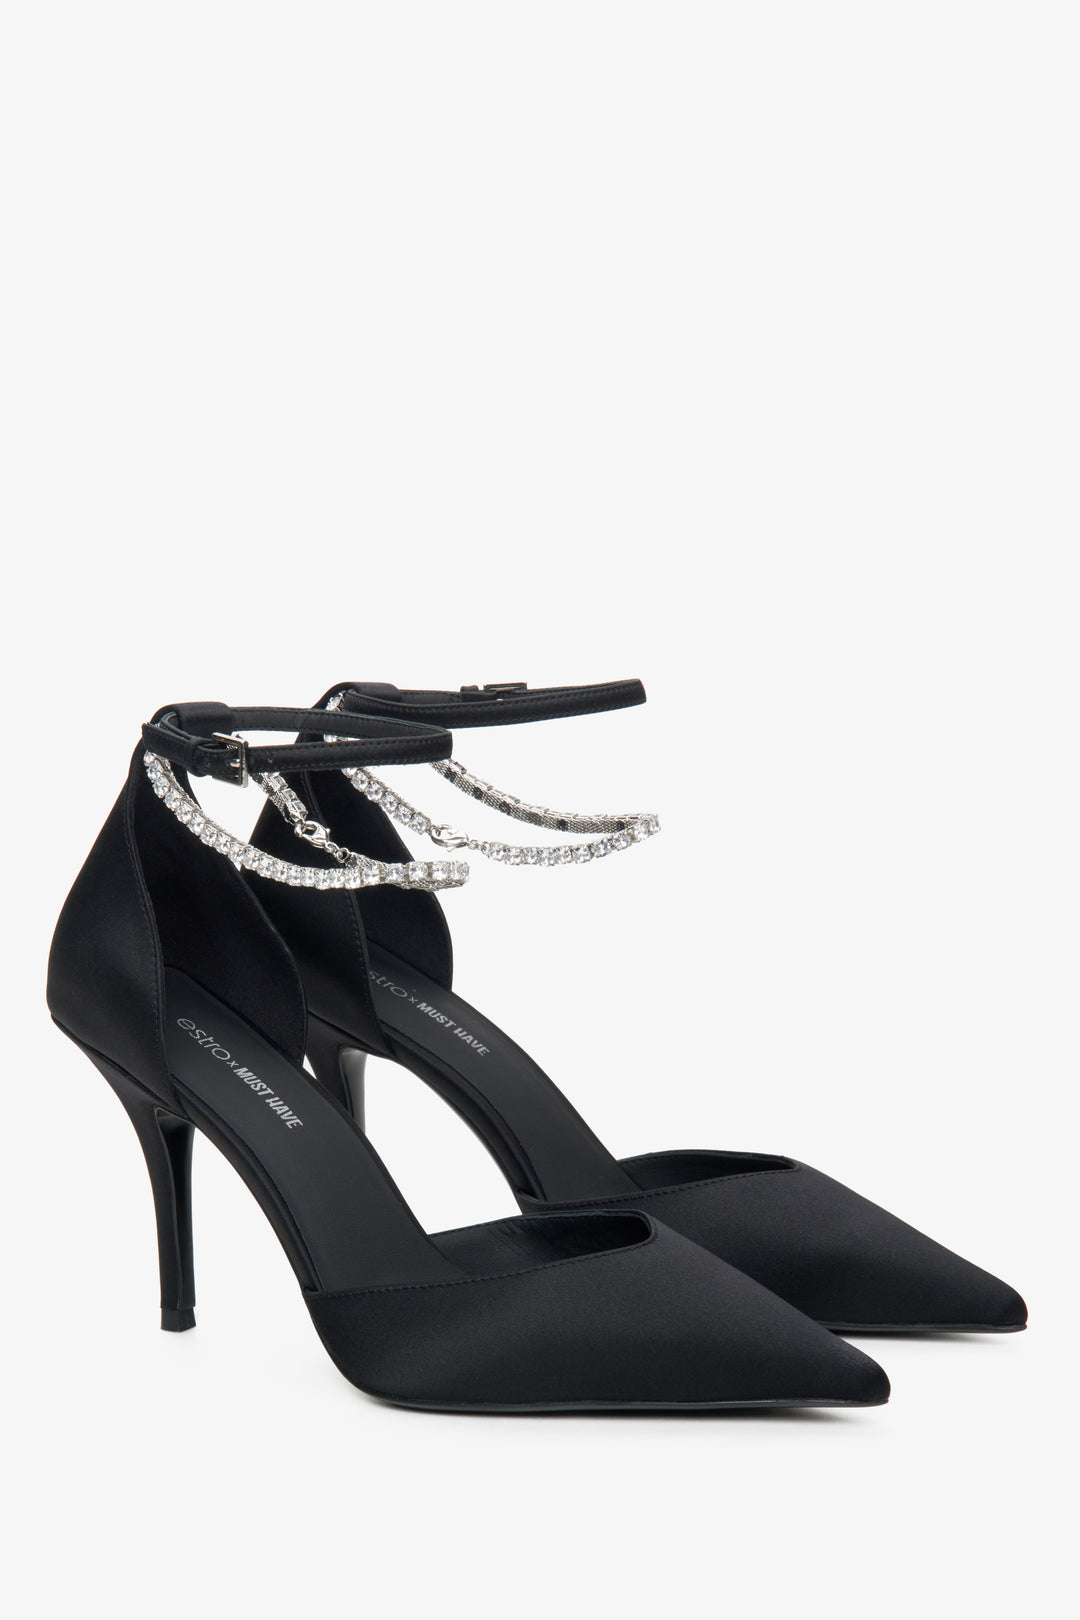 Women's black pointed toe pumps with crystals Estro x MustHave.